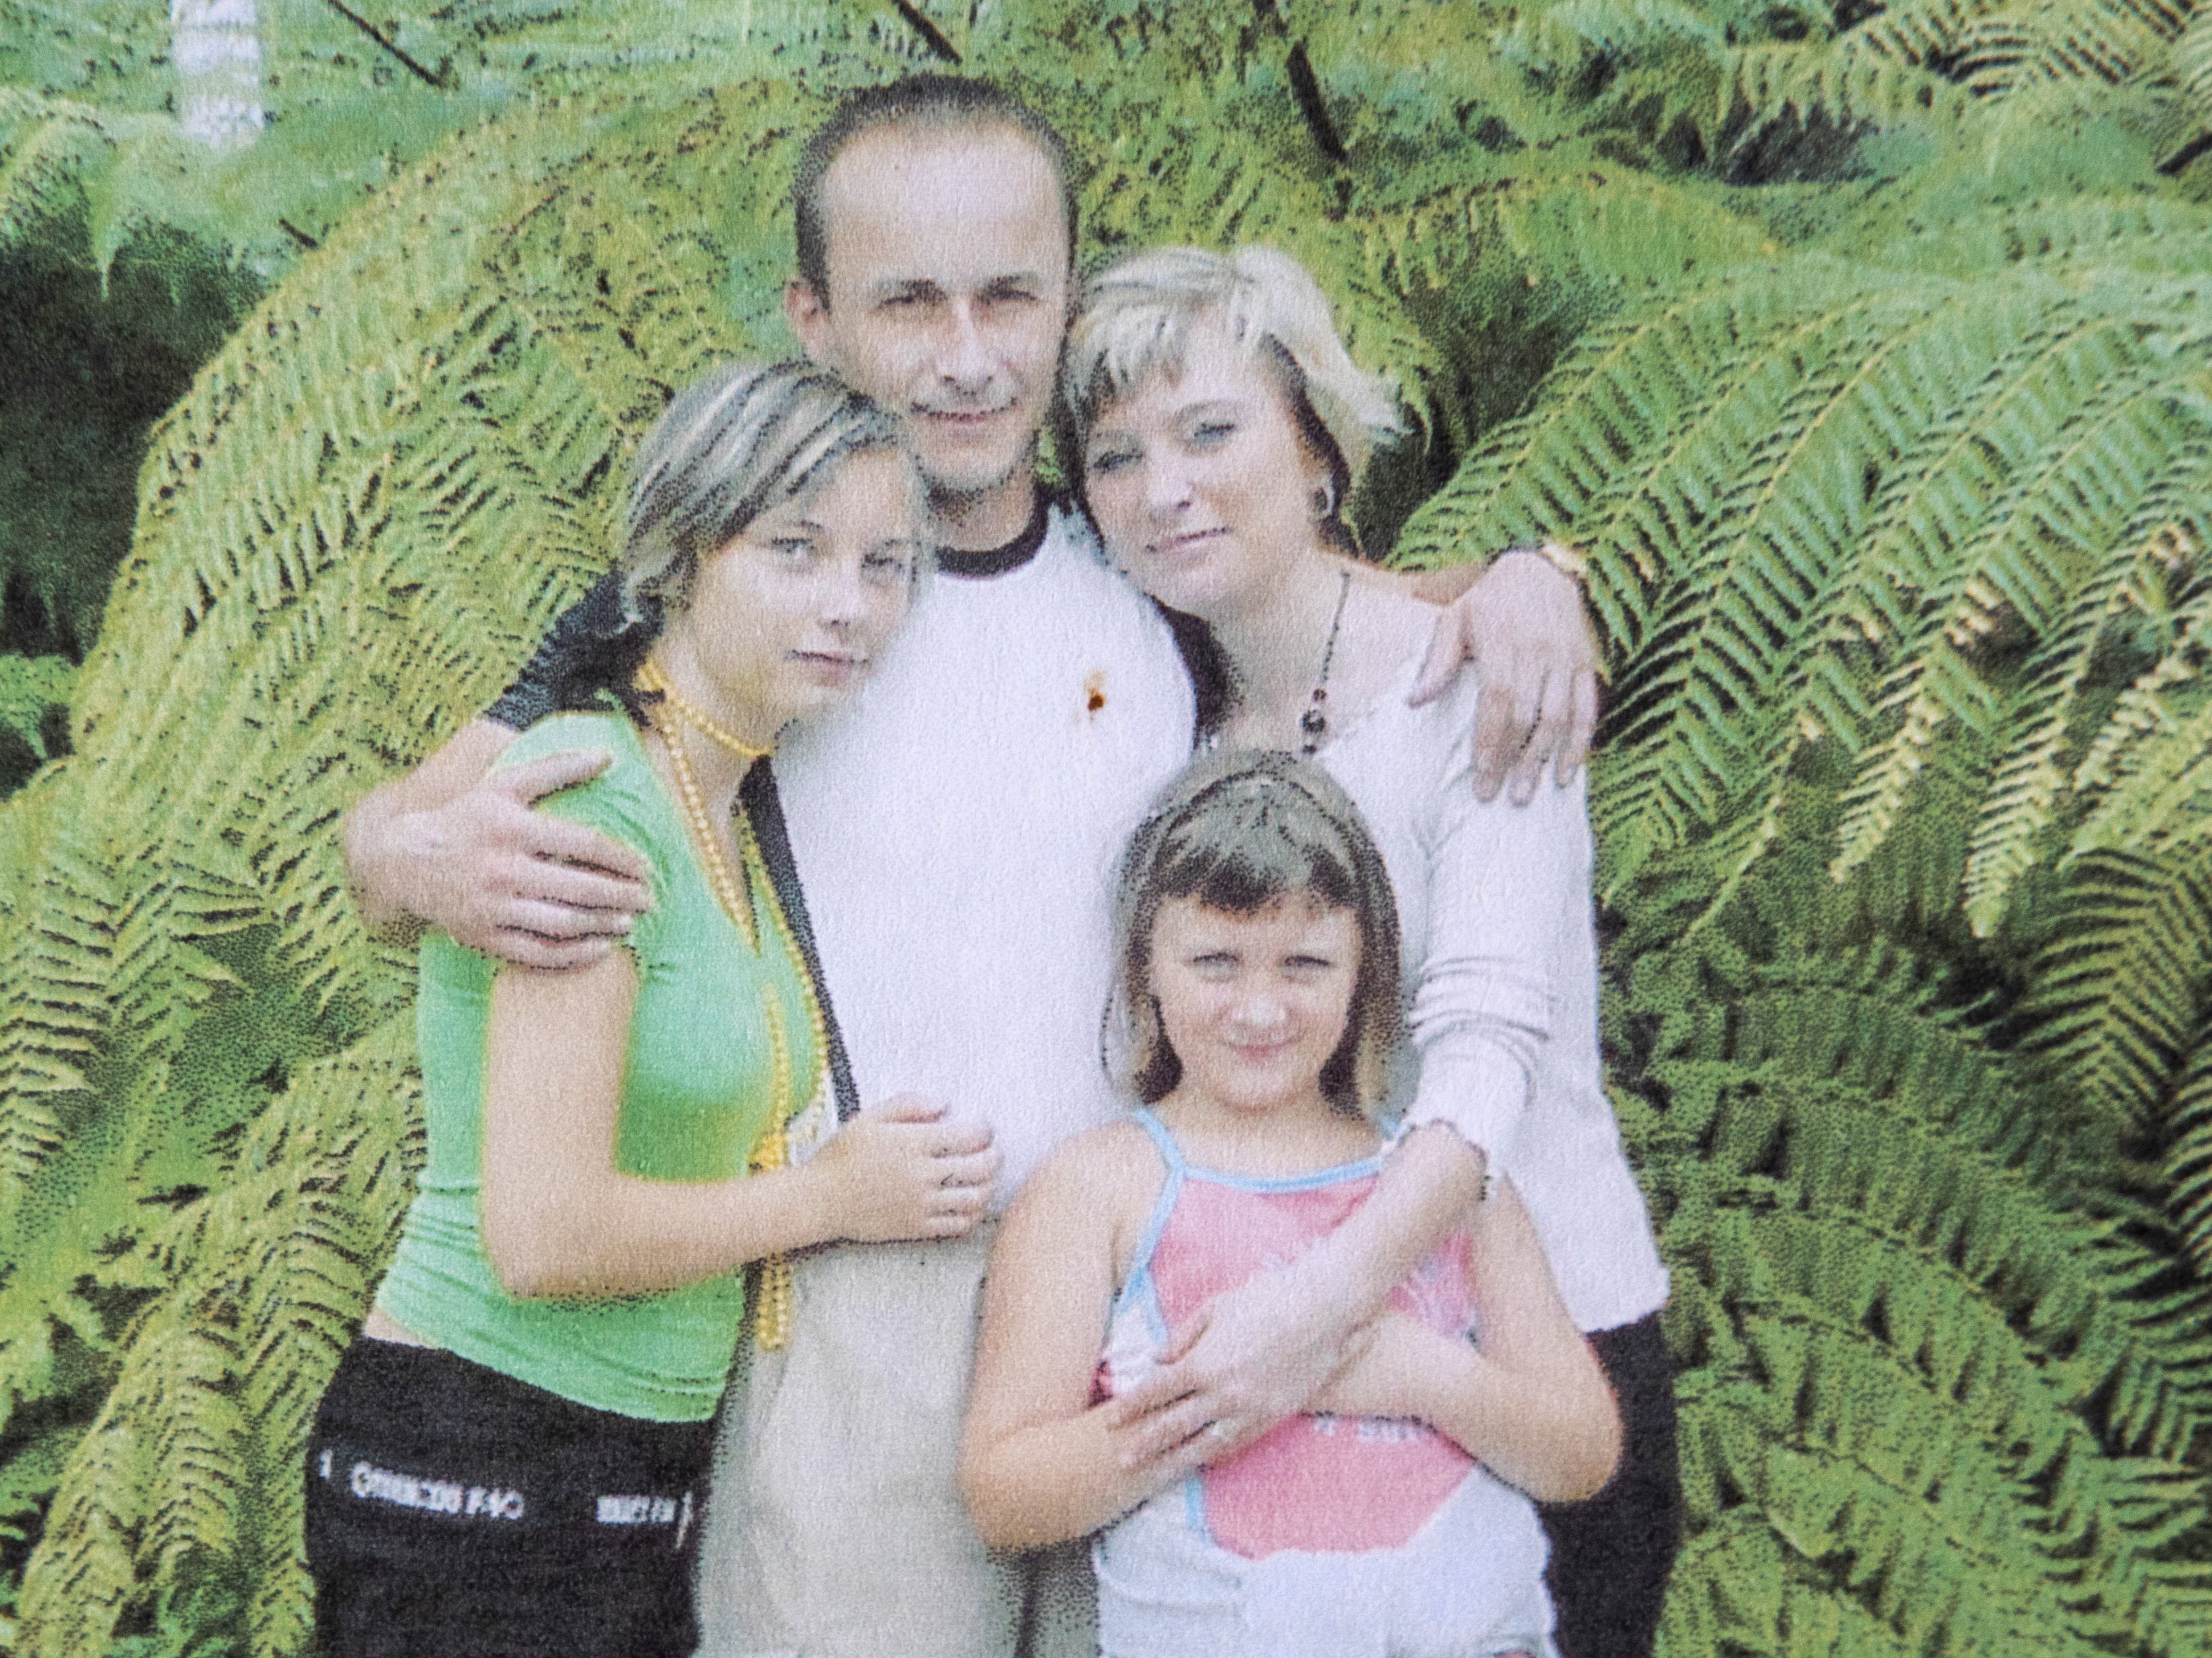 Weronika with her parents Robert and Kate Bomba and sister Dajana Wrozek in 2009